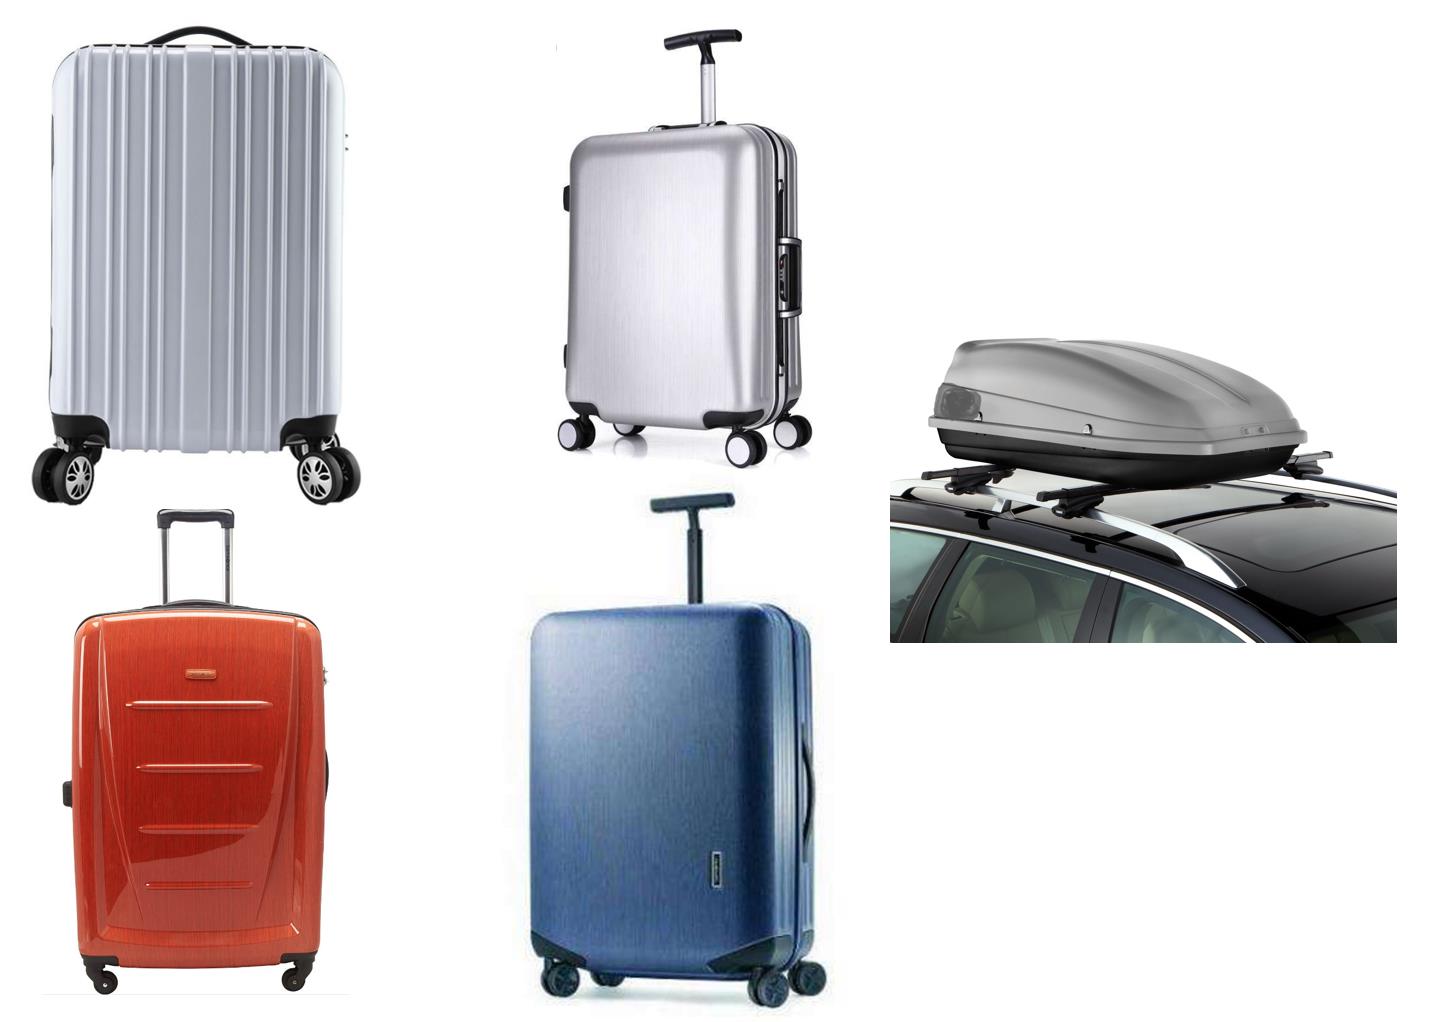 Polycarbonate Film & Sheets for Travel